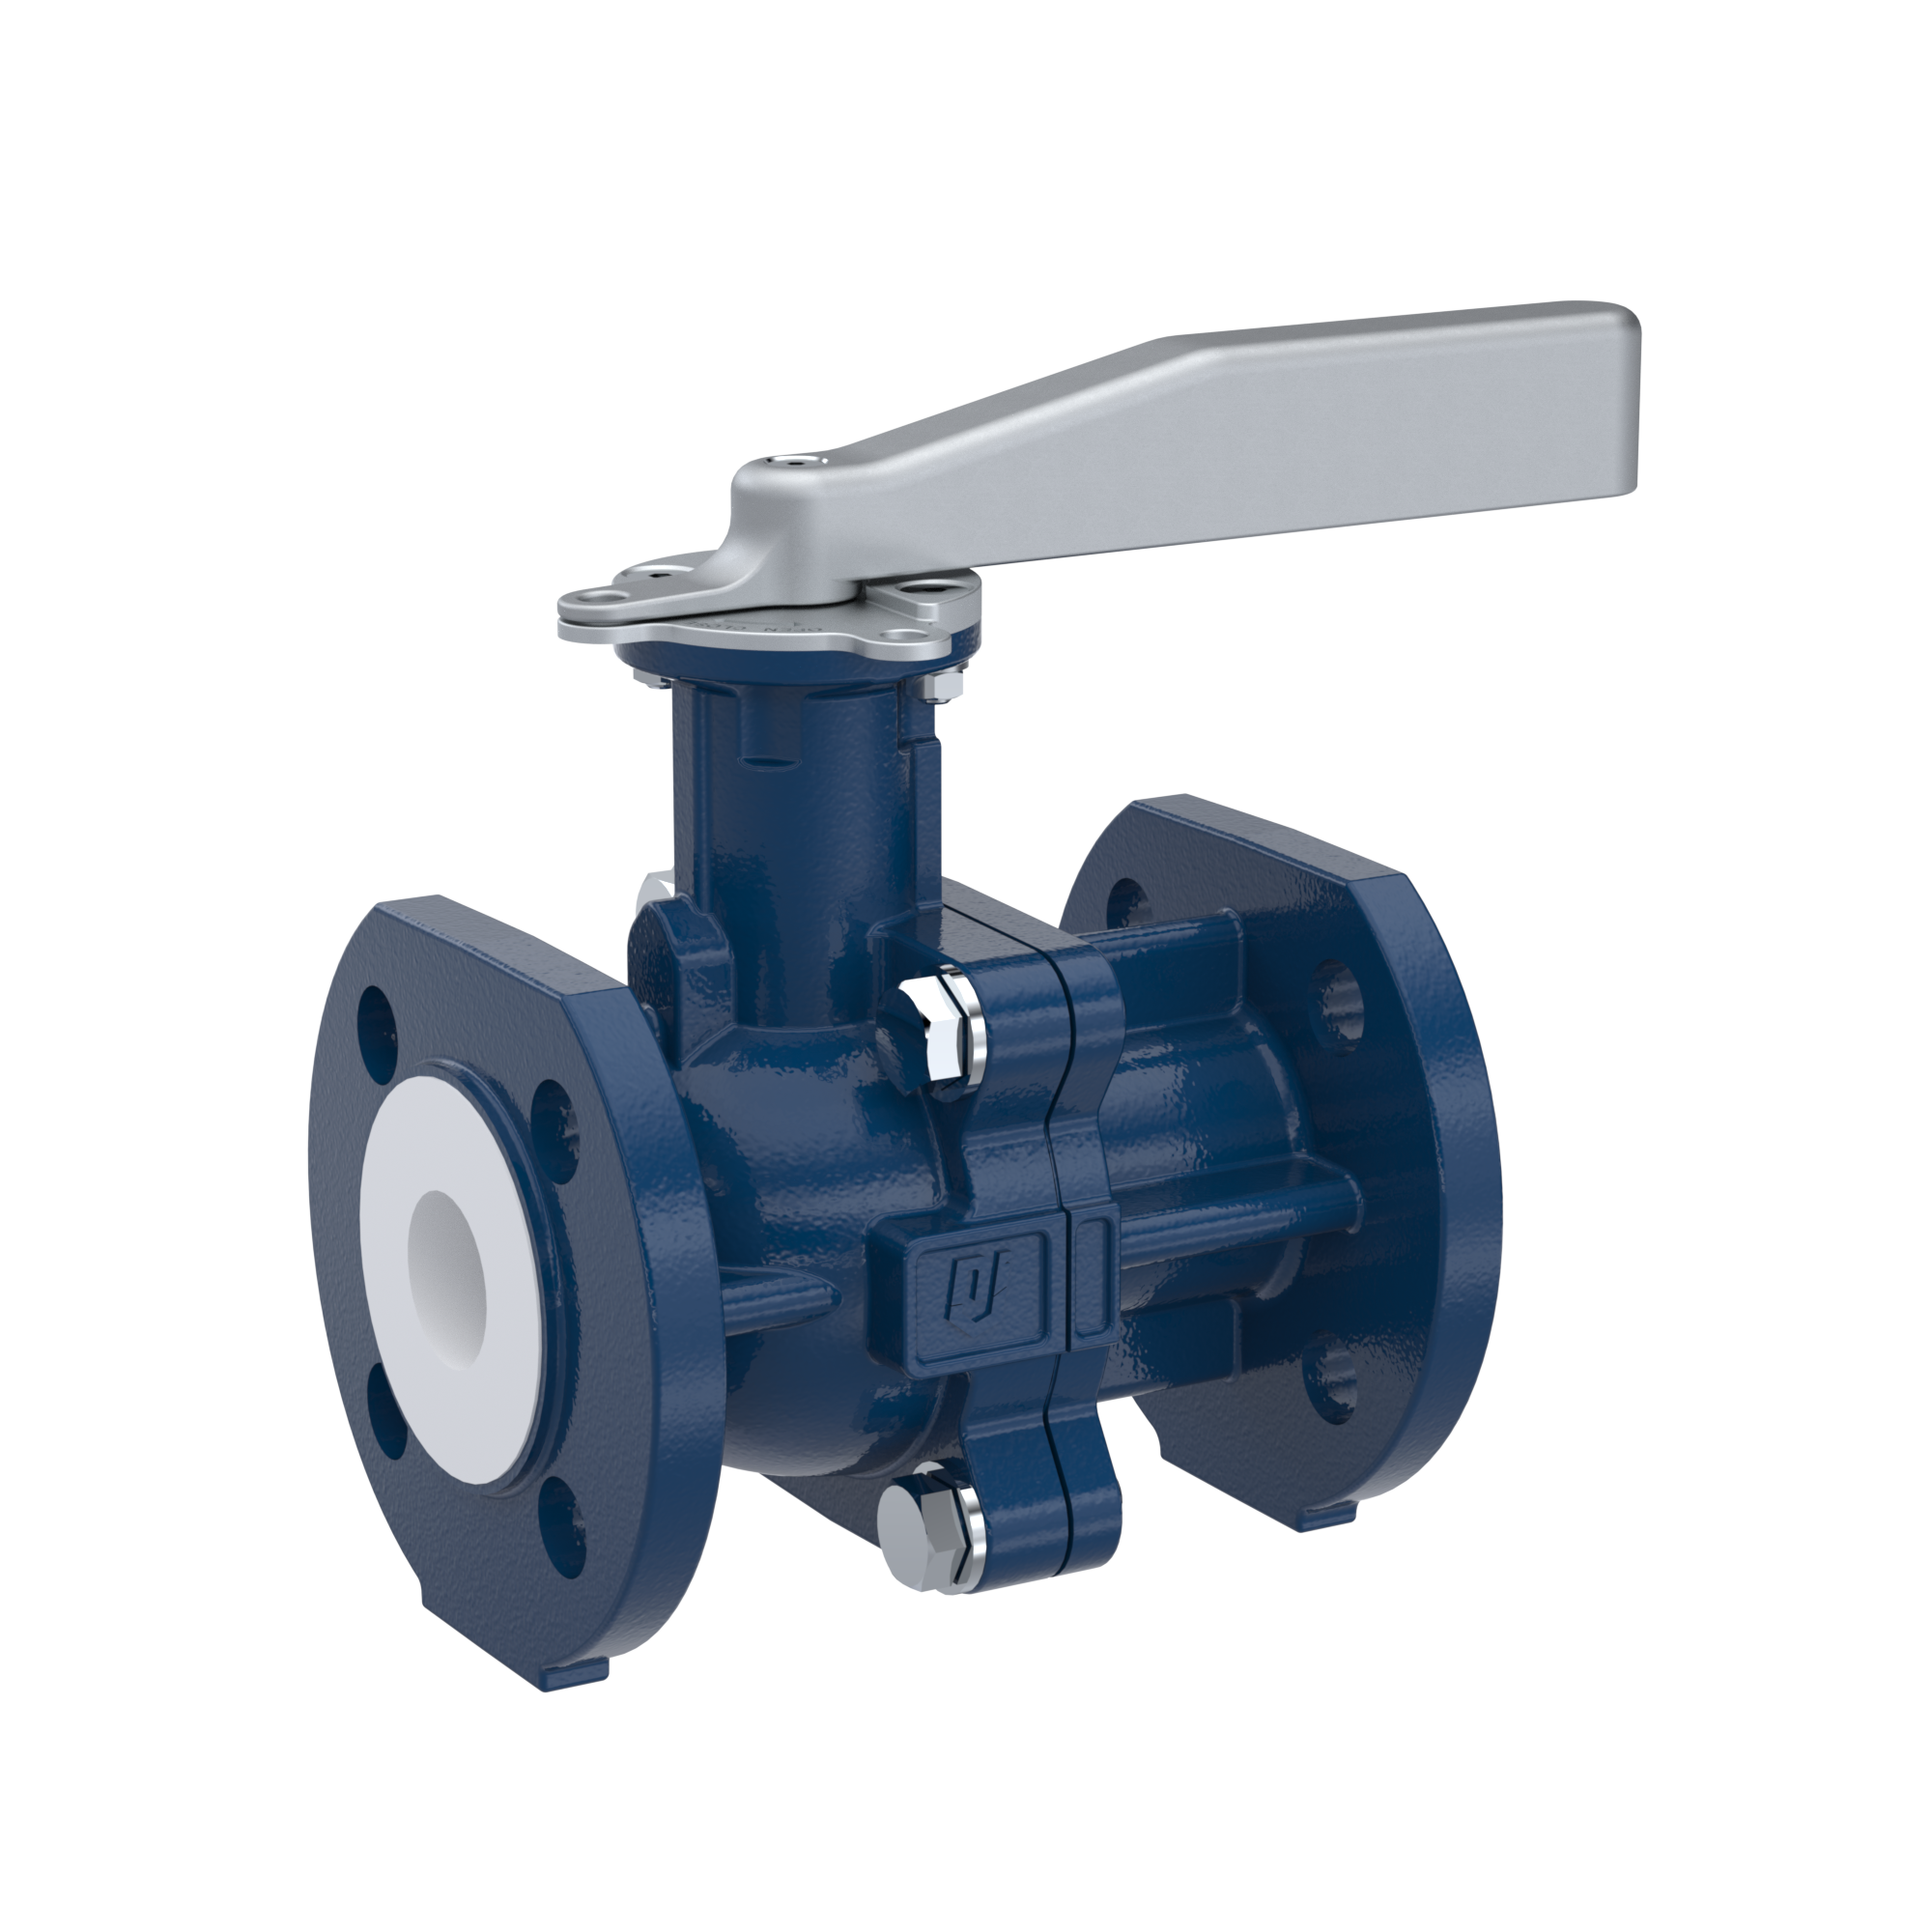 PFA-flange ball valve FK13 DN25 - 1" inch PN10/16 made of spheroidal graphite cast iron with lever hand